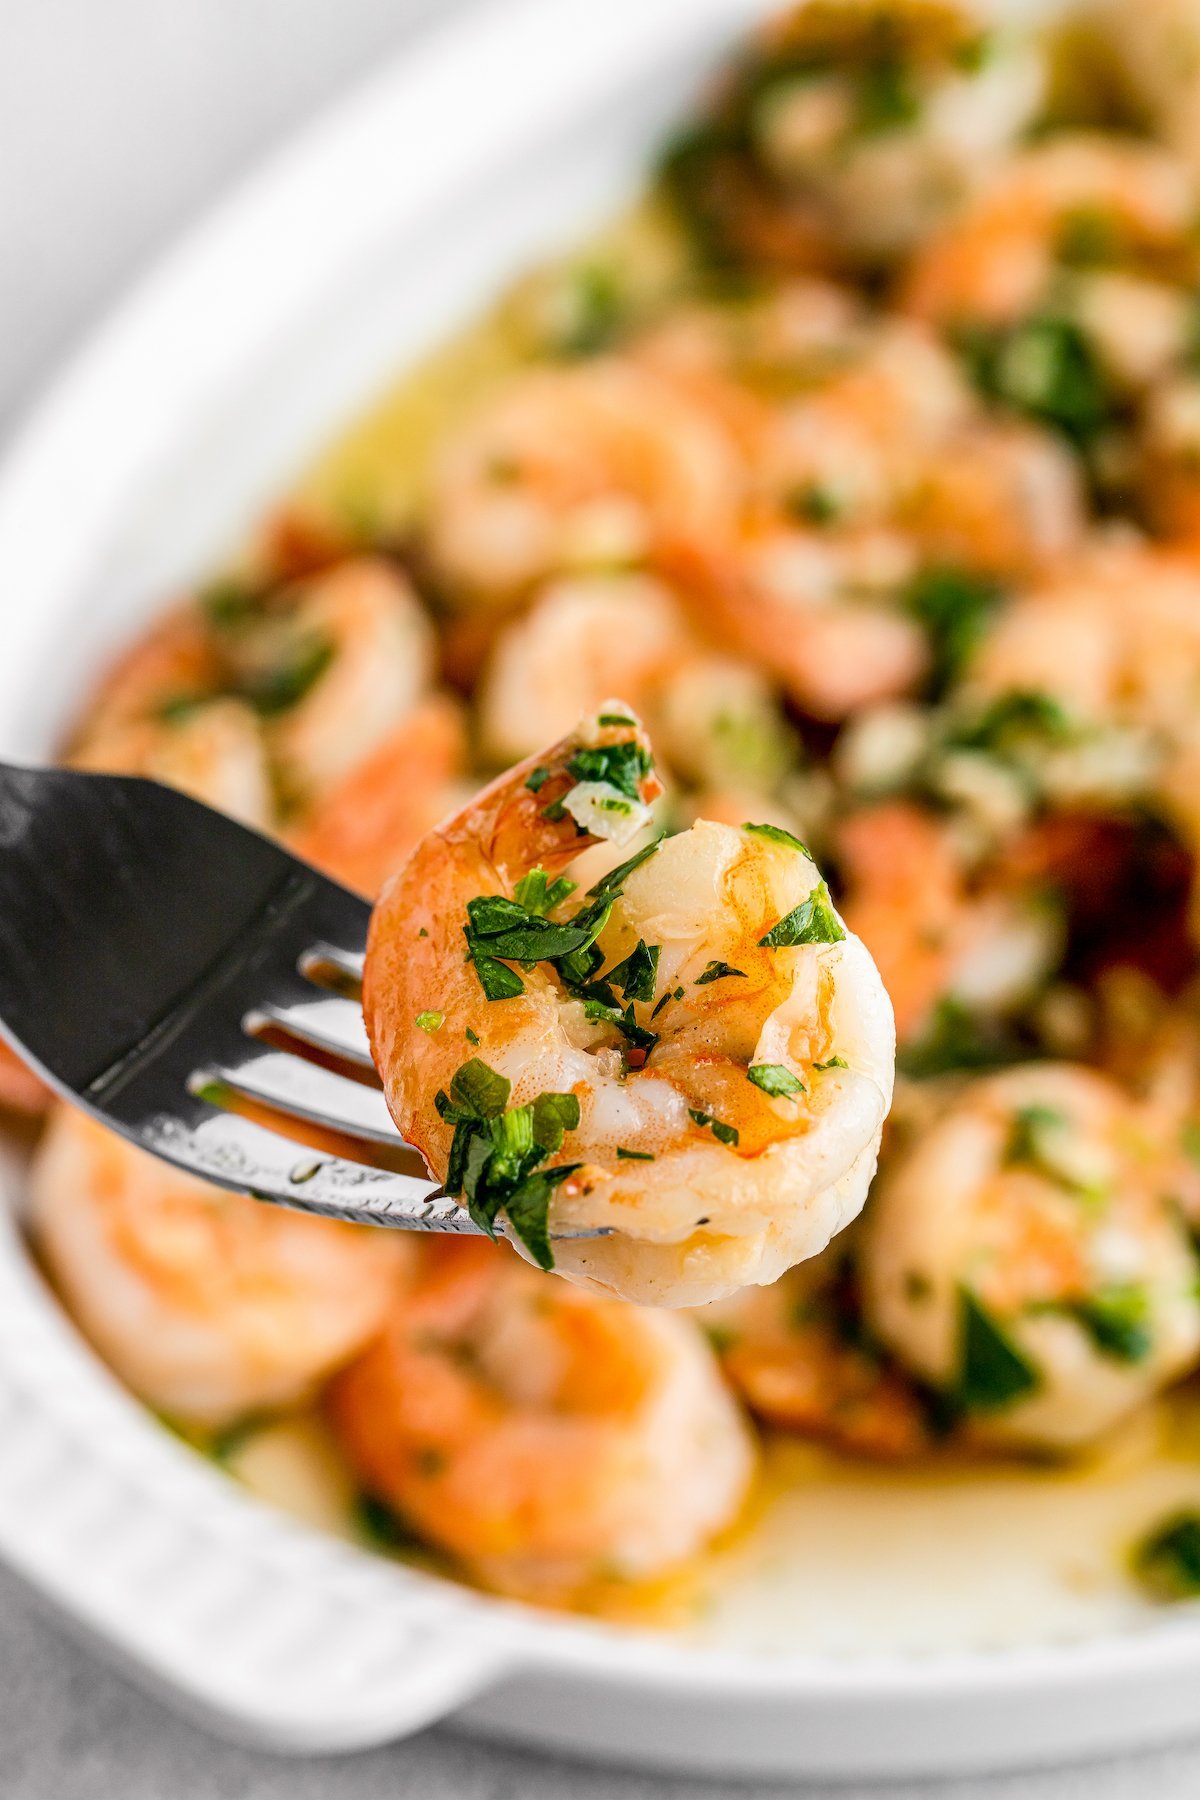 A single sauteed shrimp on a fork, held toward the camera. A plate of garlic shrimp is in the background of the shot.